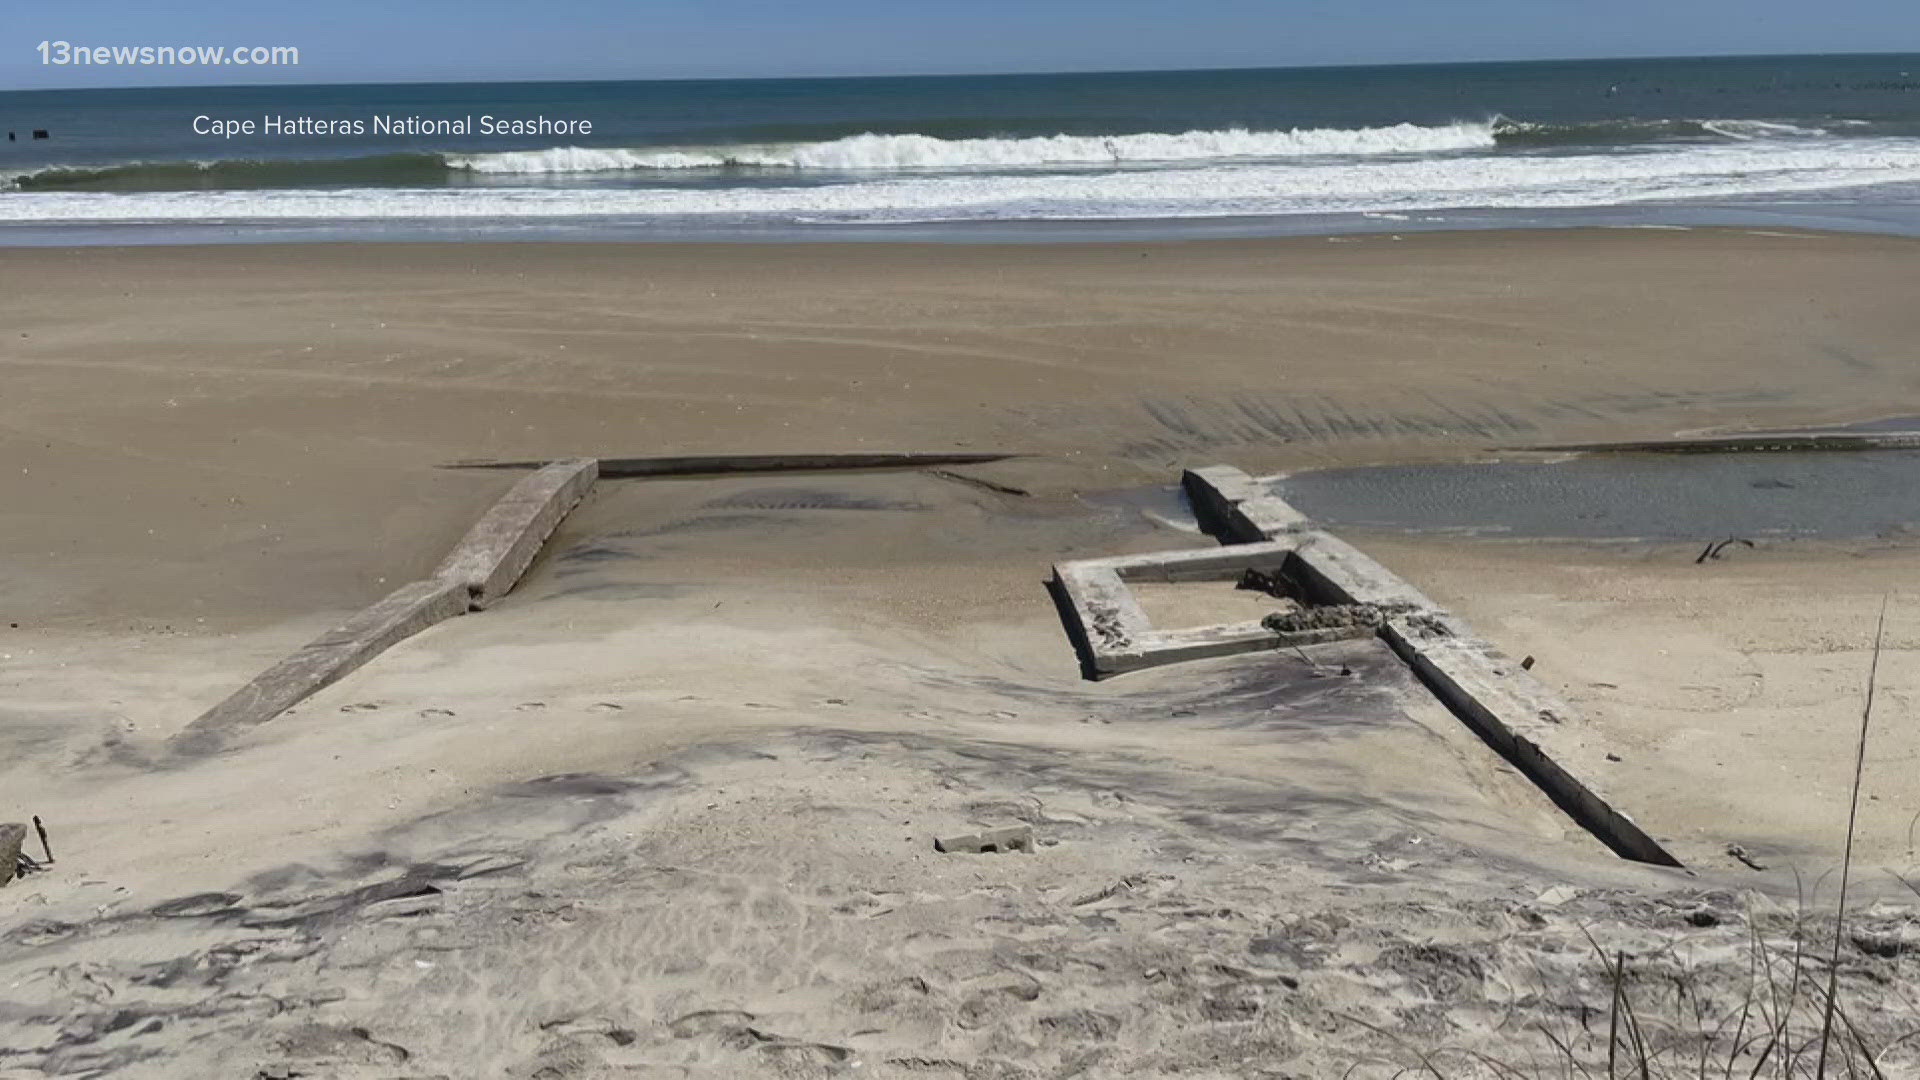 In North Carolina, a section of beach in Buxton is closed more than a month after crews discovered petroleum contamination.